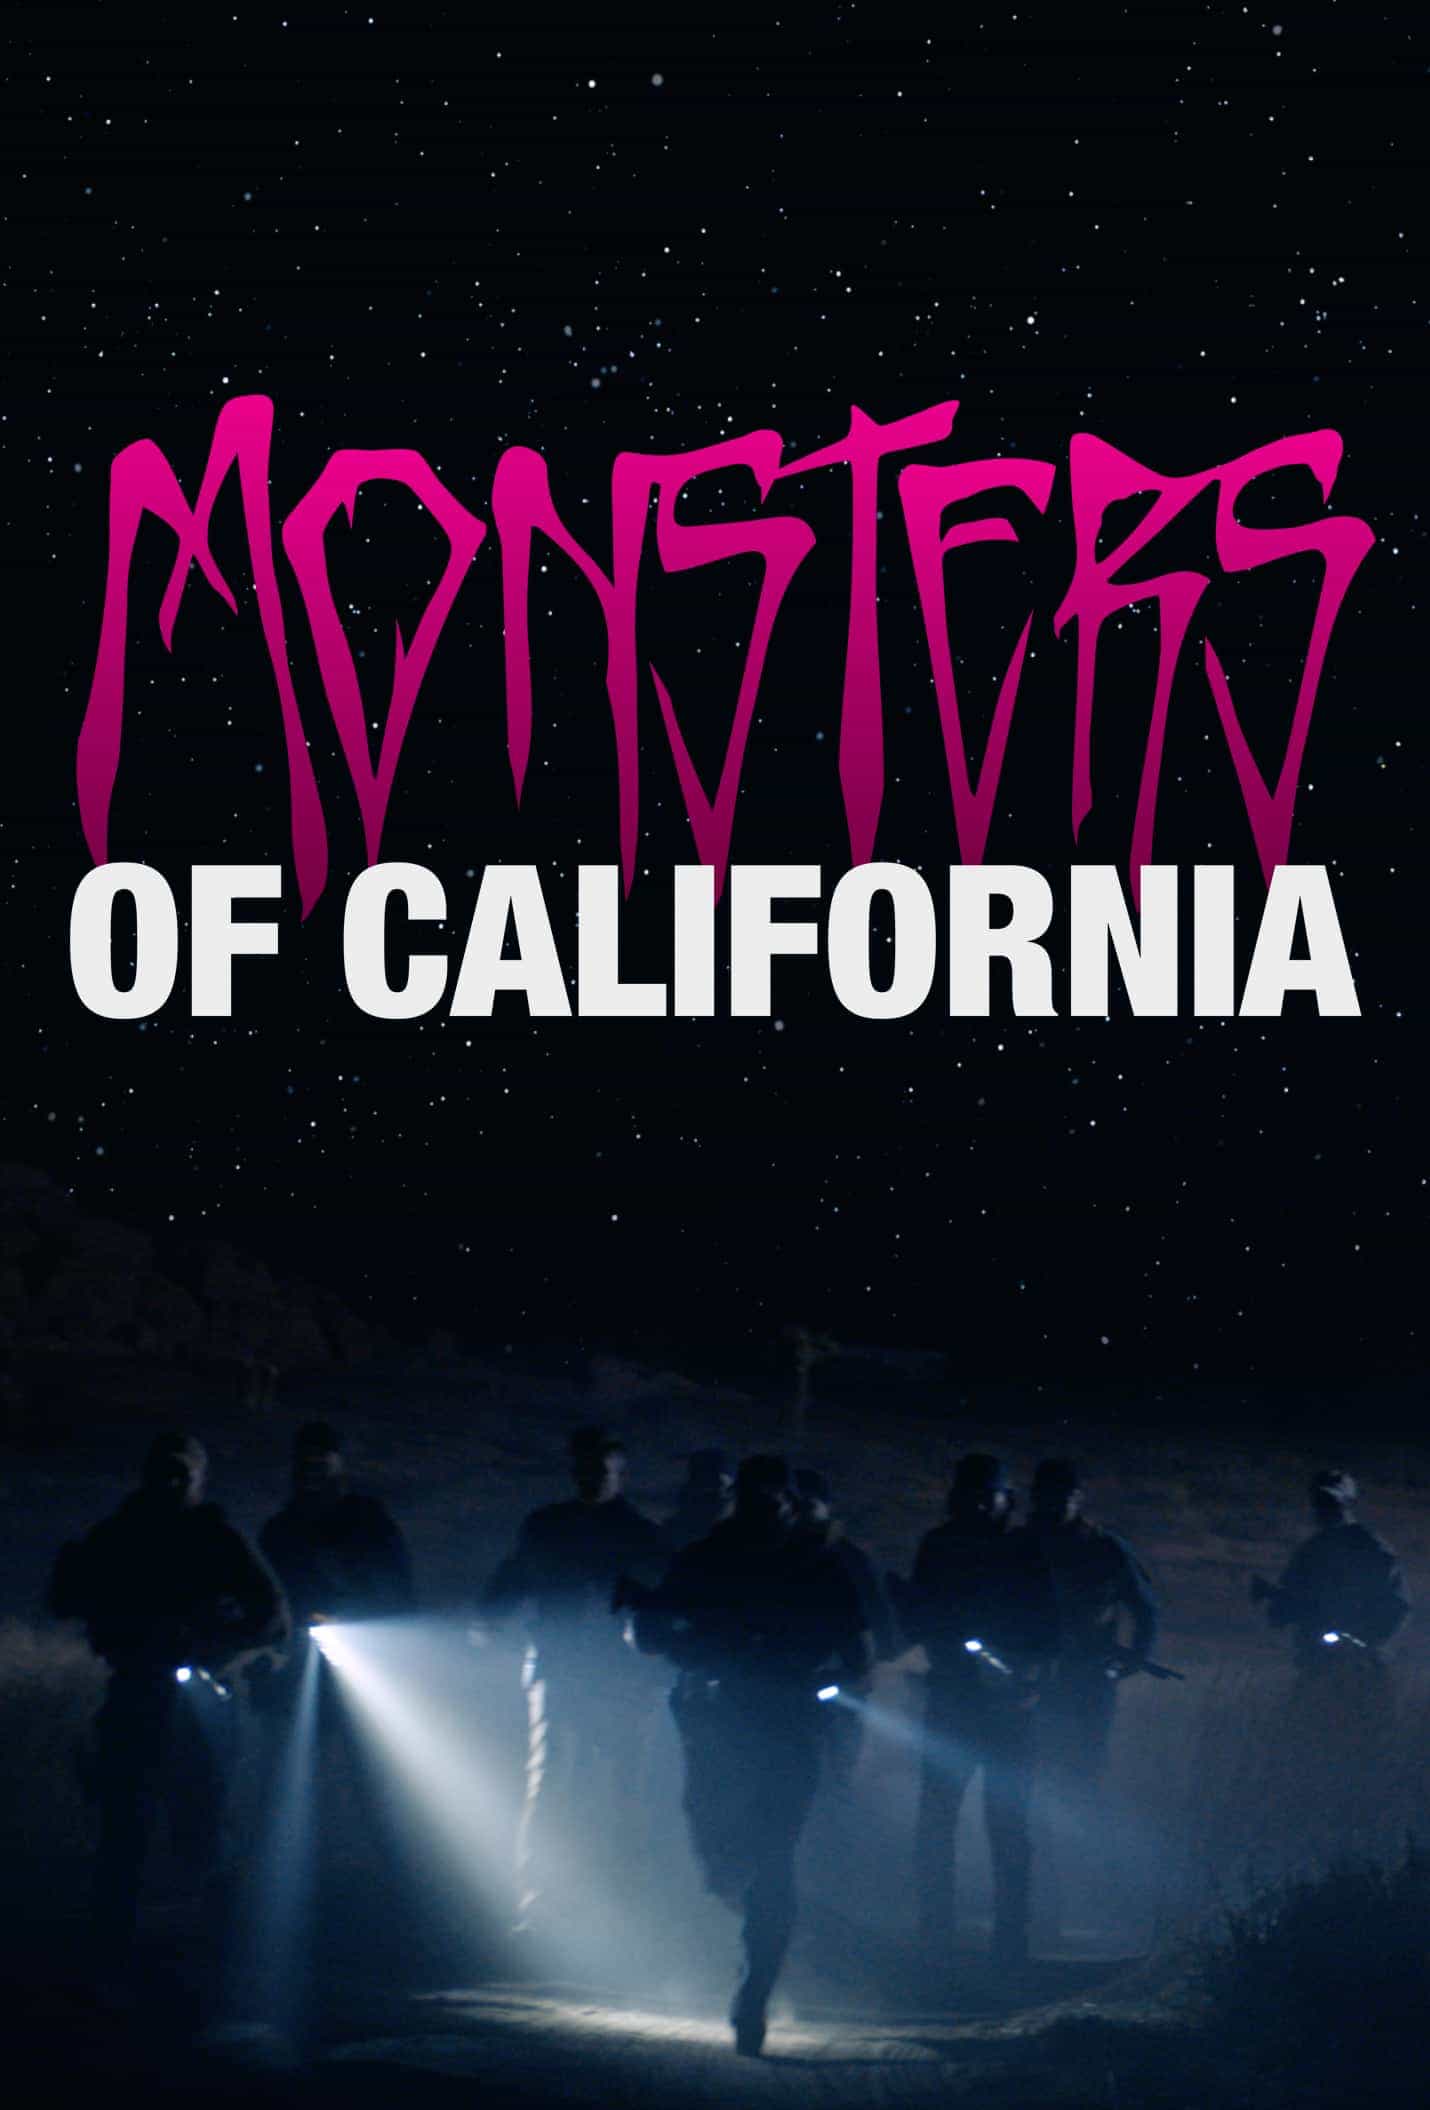 Tom DeLonge Movie Debut Monsters of California Bought By Screen